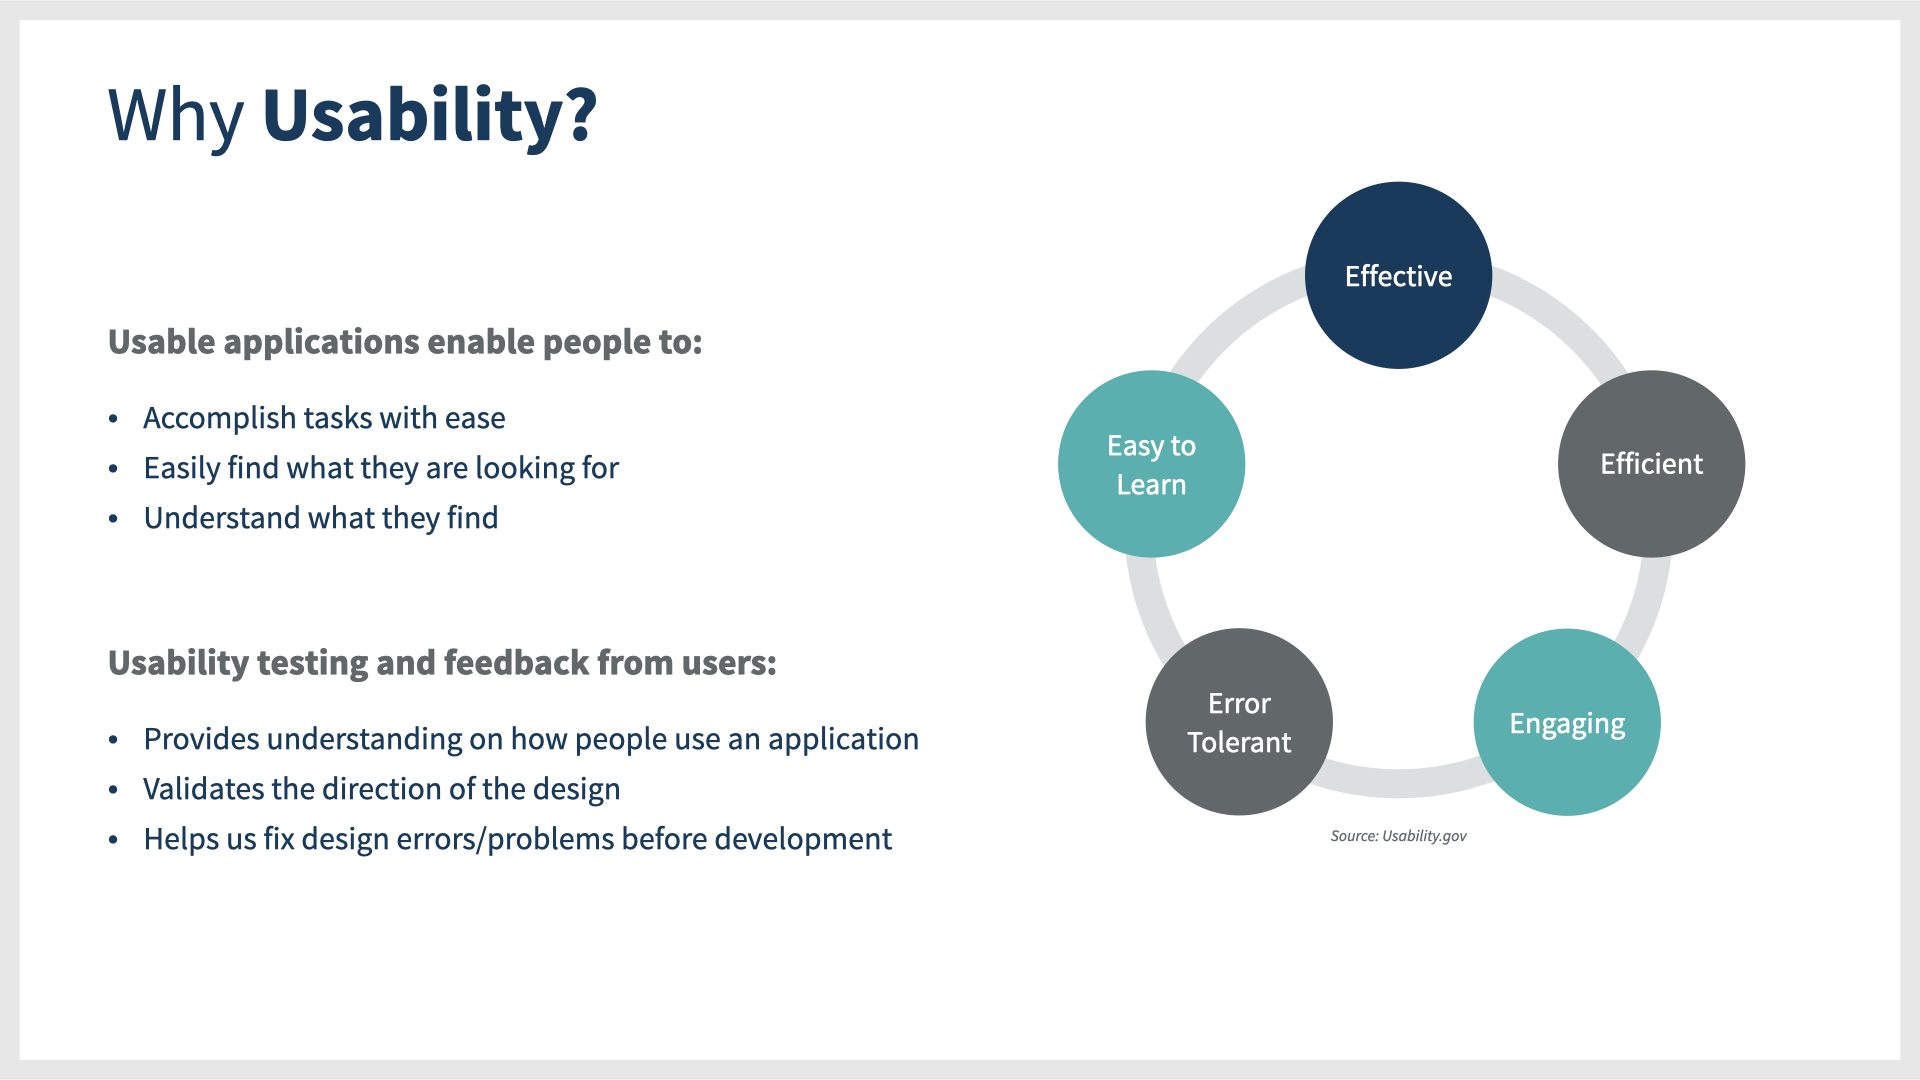 Why Usability?